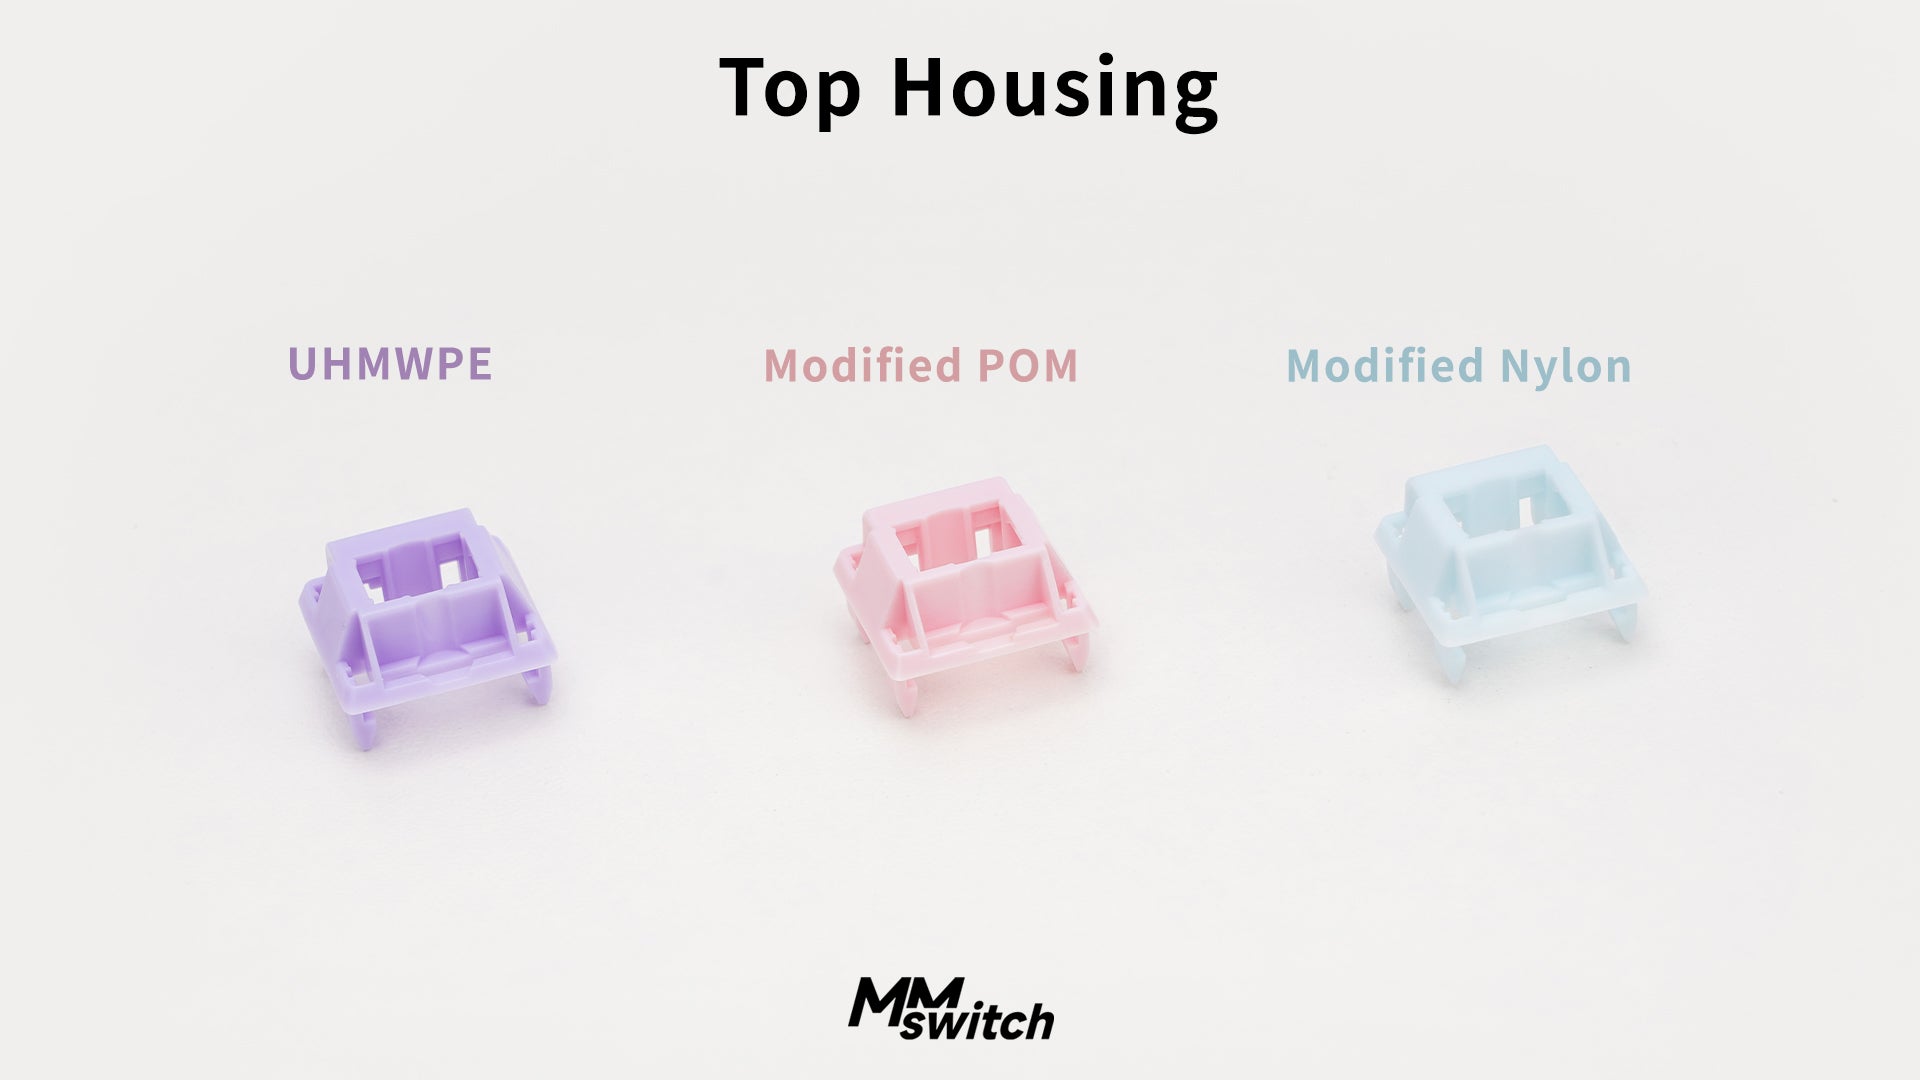 MMswitch - Pastel Top Housing – Wuque Studio